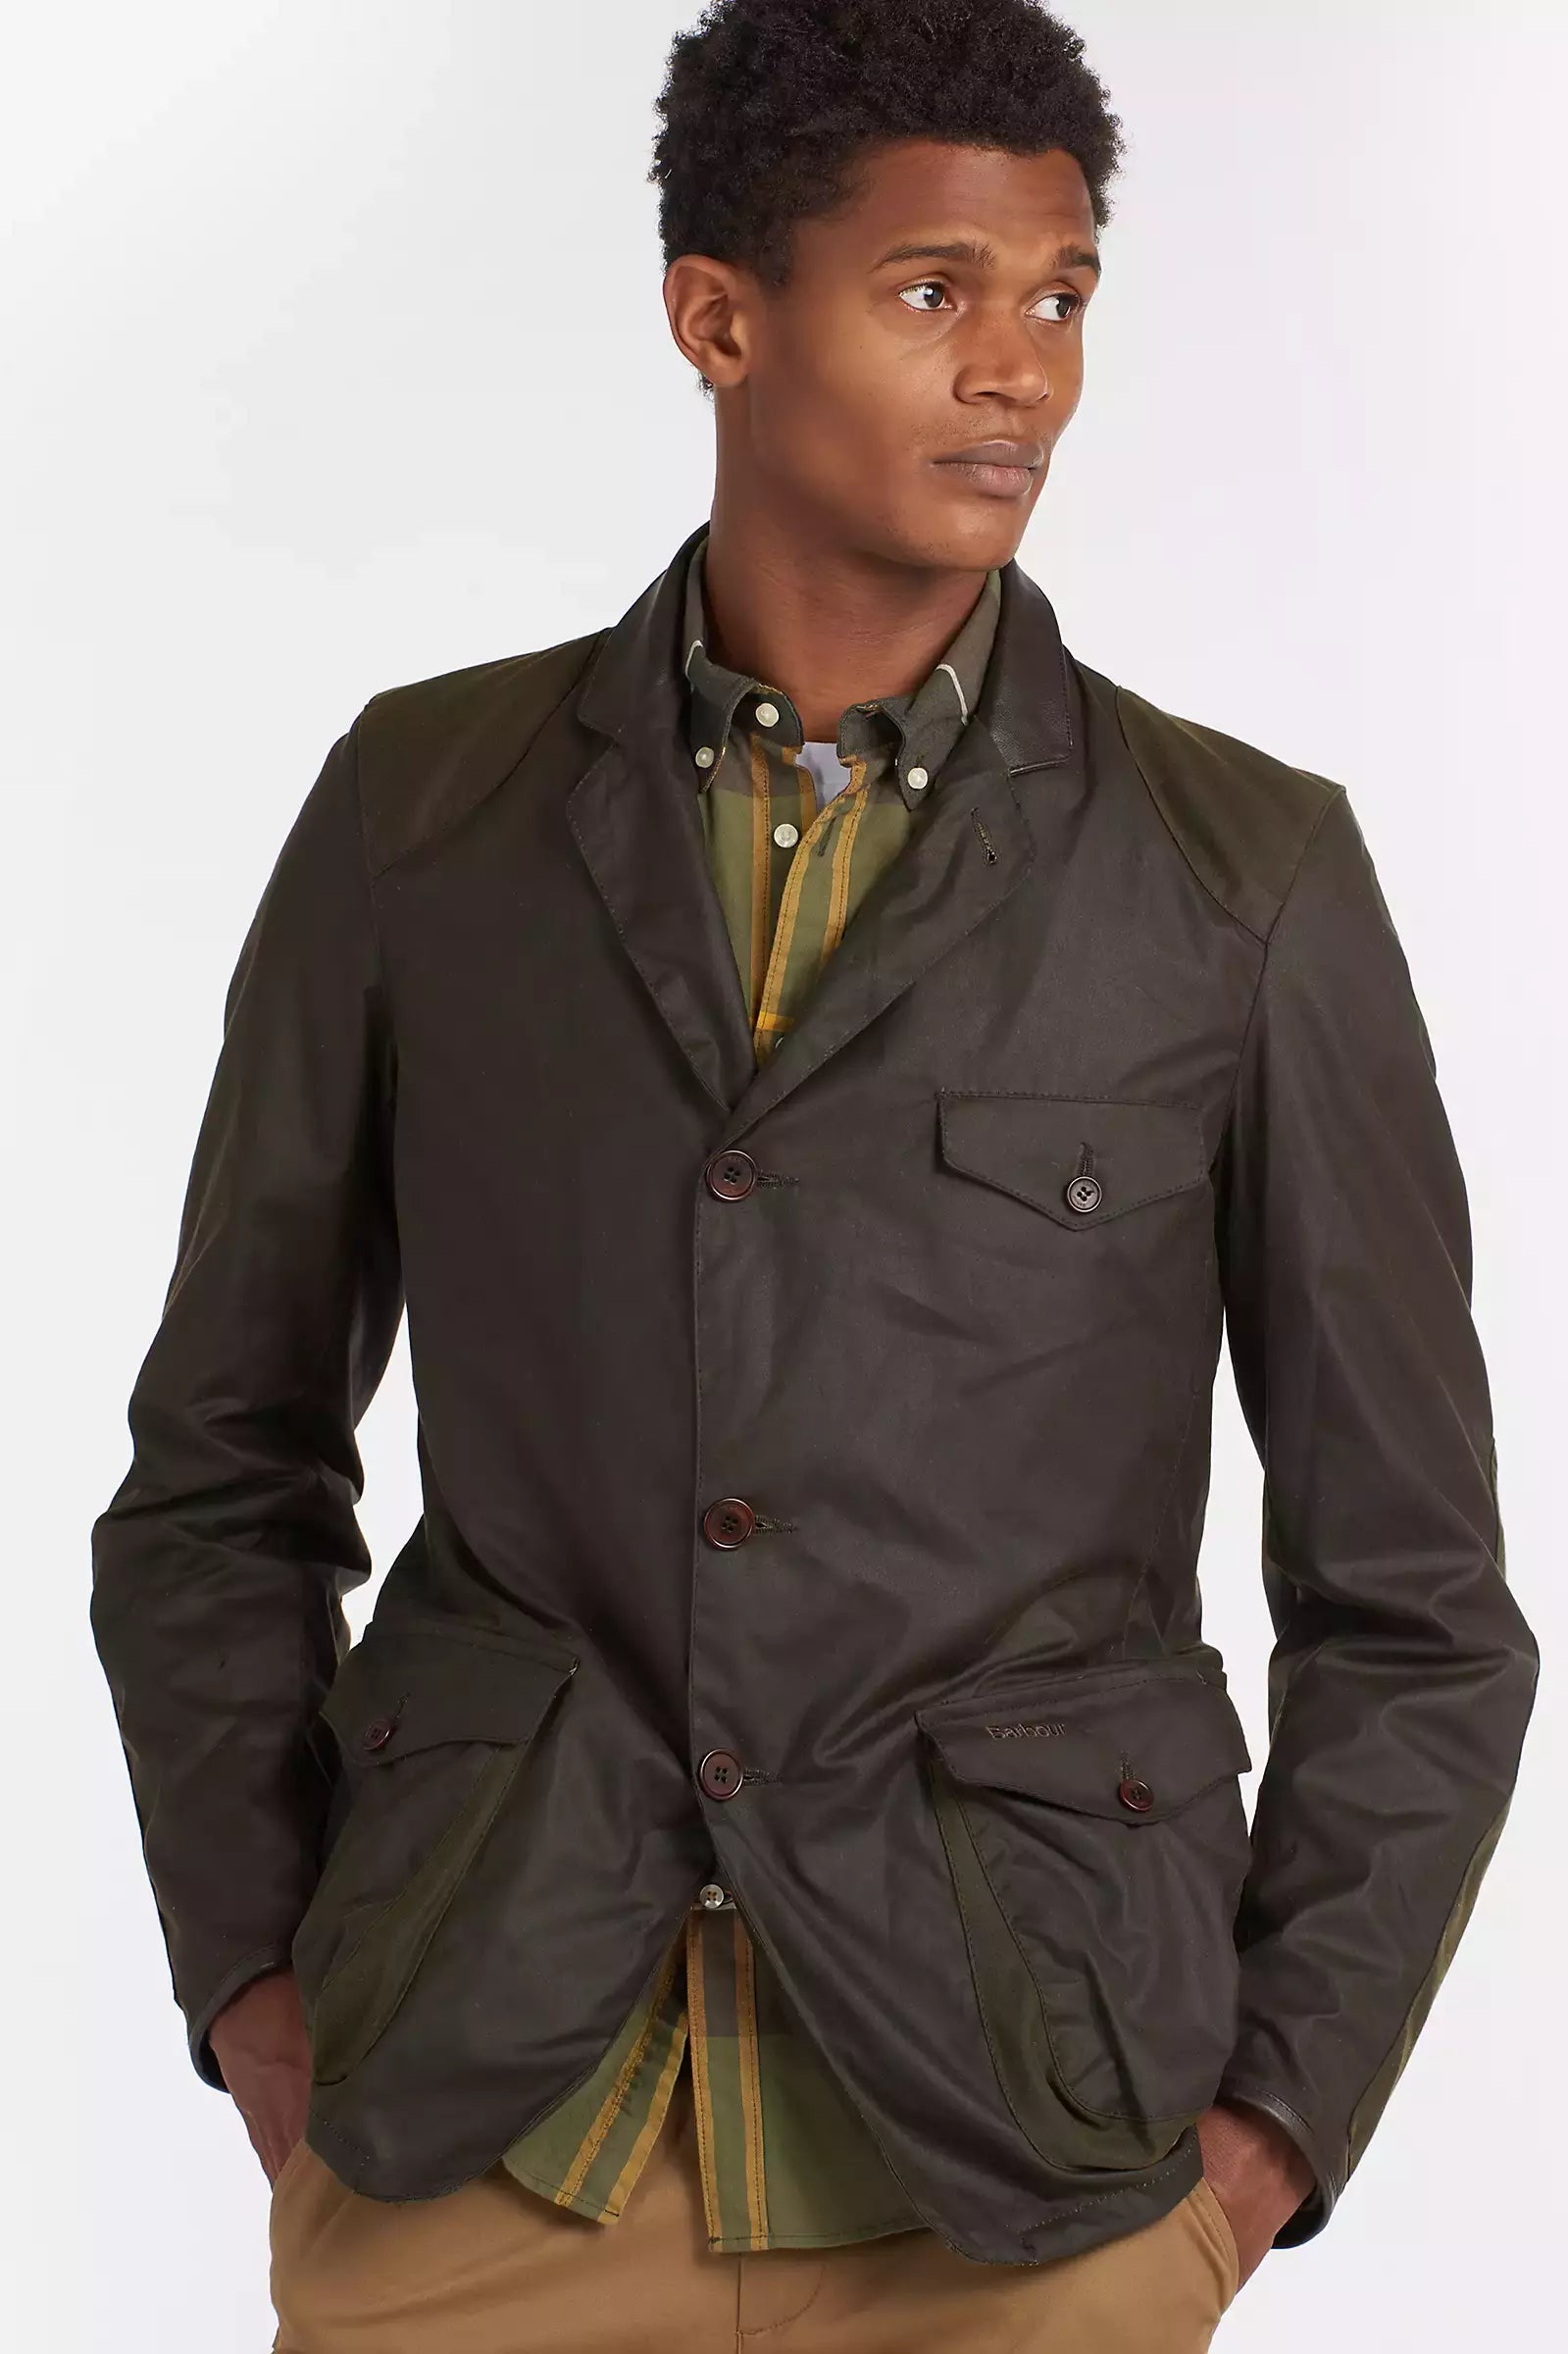 Barbour Beacon - The James Bond 007 Skyfall - Wax Jacket in Olive Waxed  Cotton – Smyths Country Sports